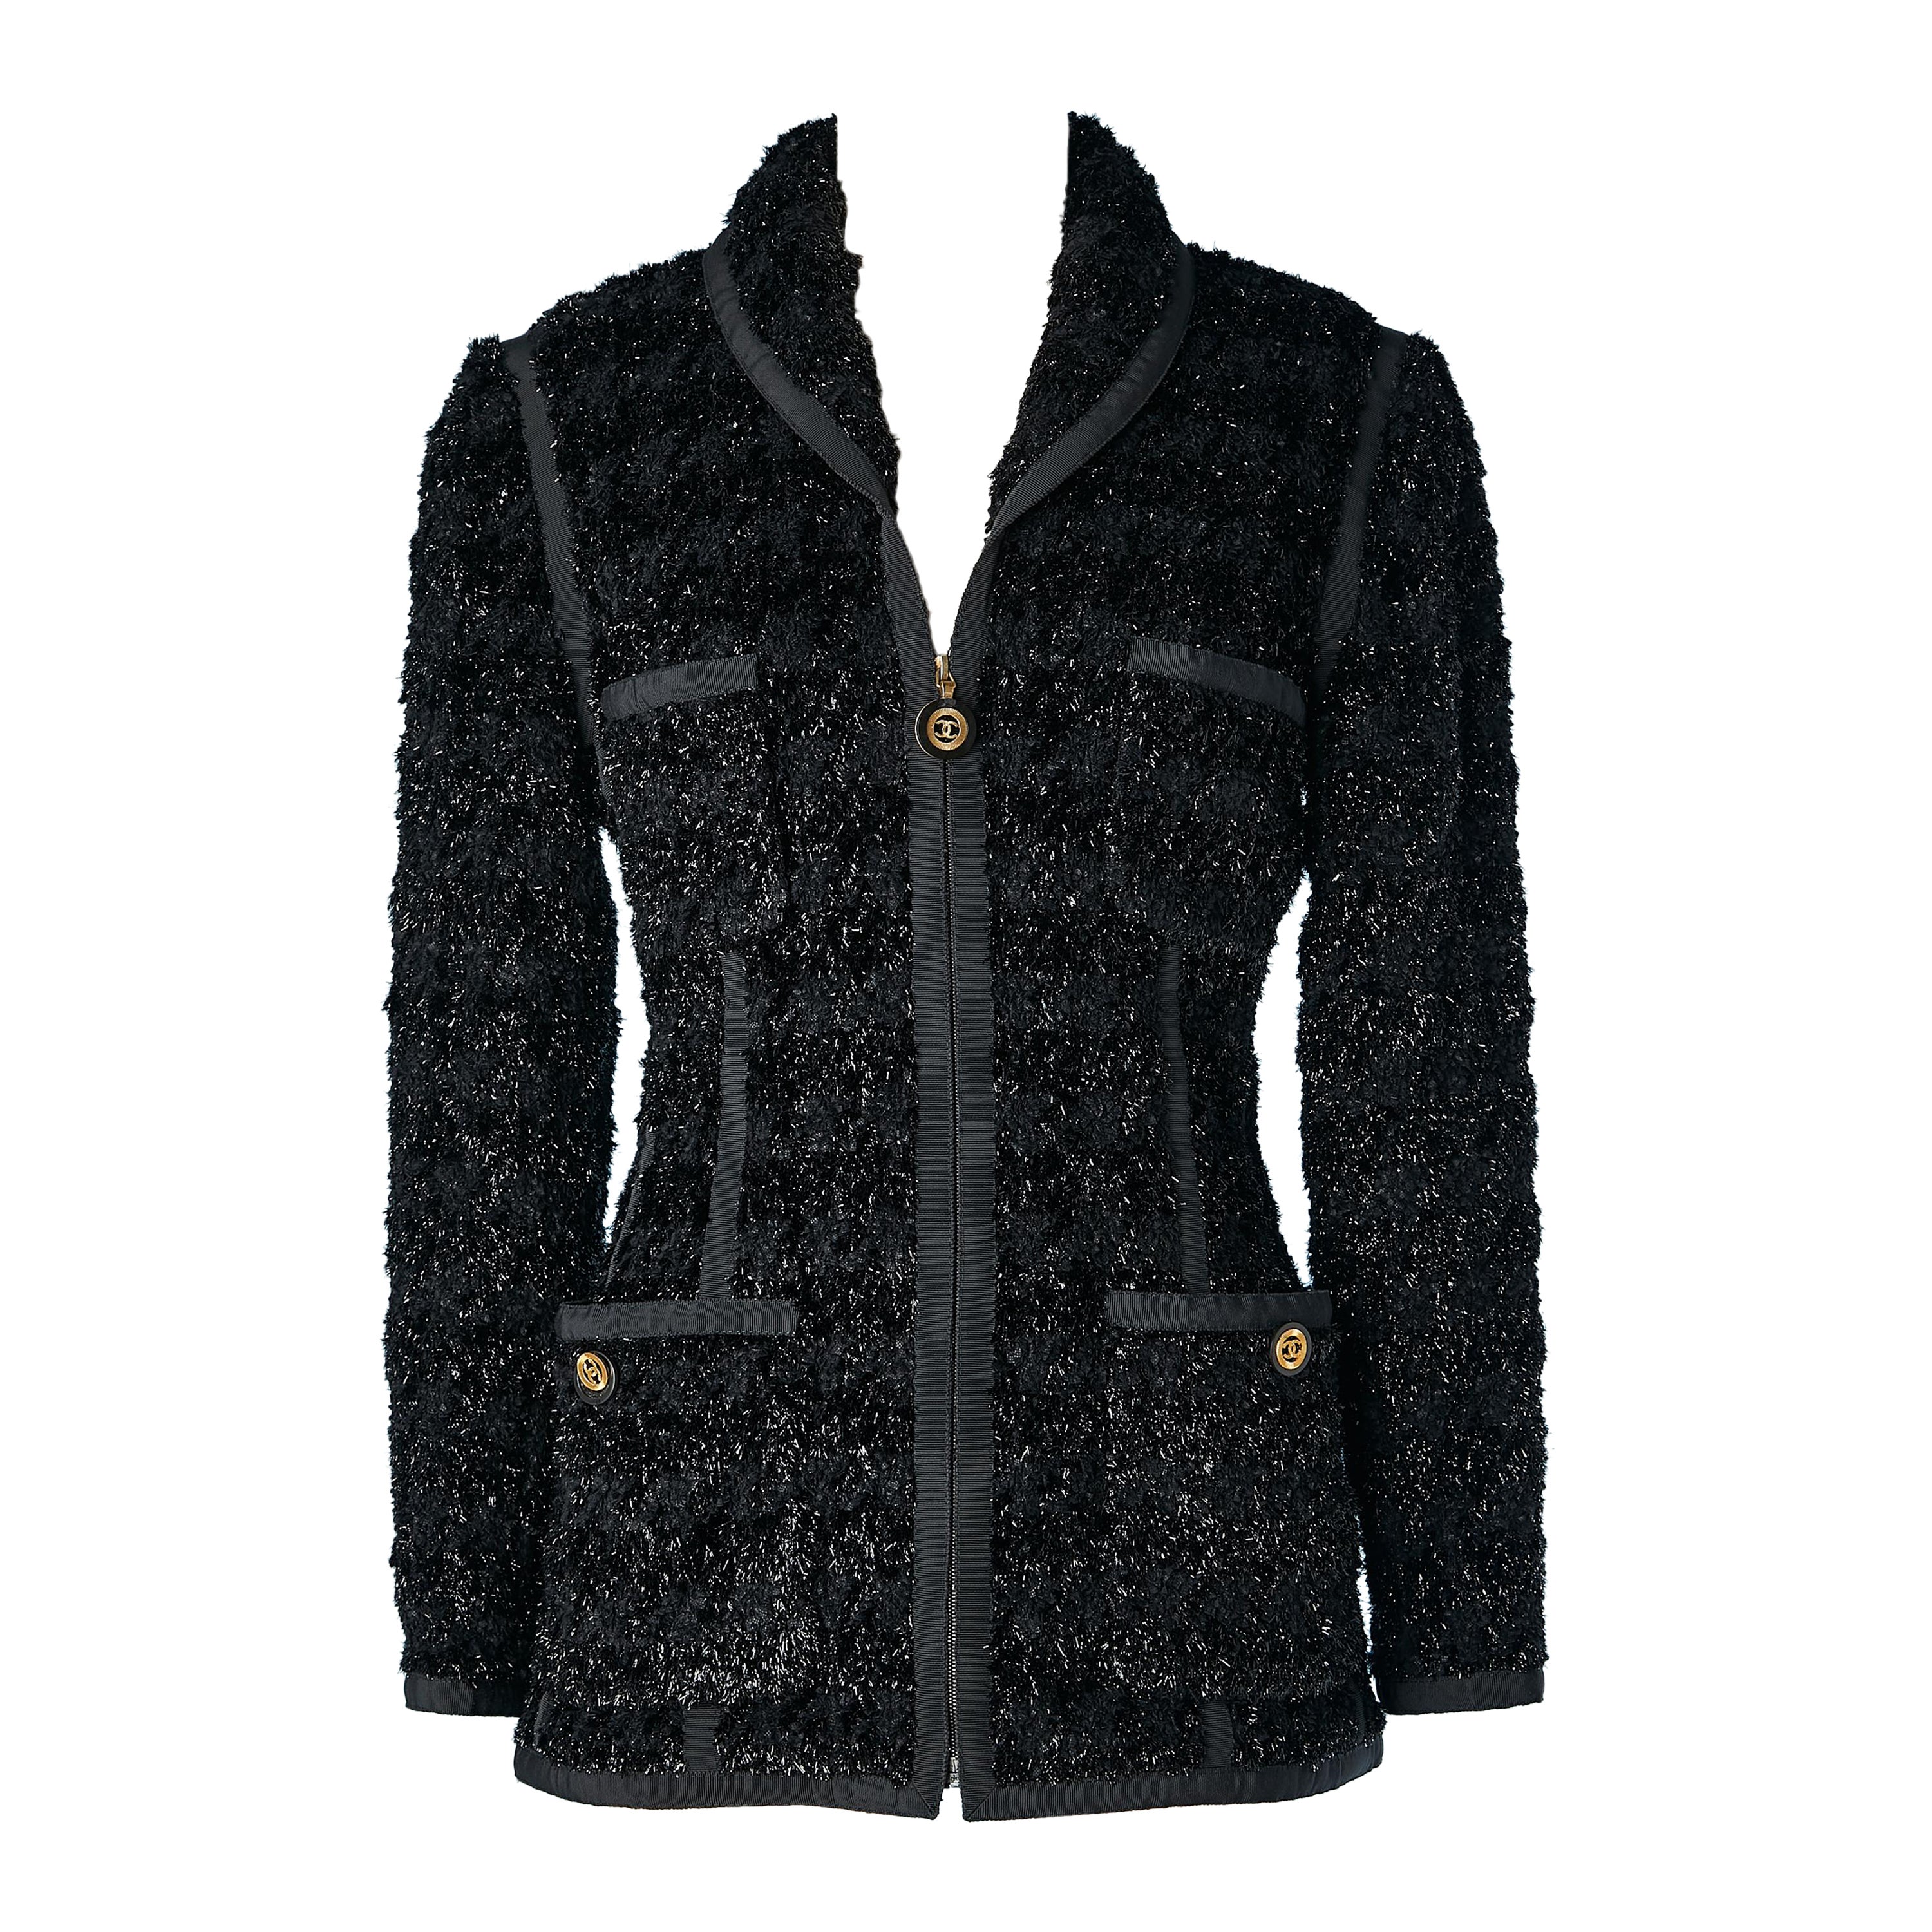 Black lurex tweed evening jacket with zip in the middle front Chanel Boutique 